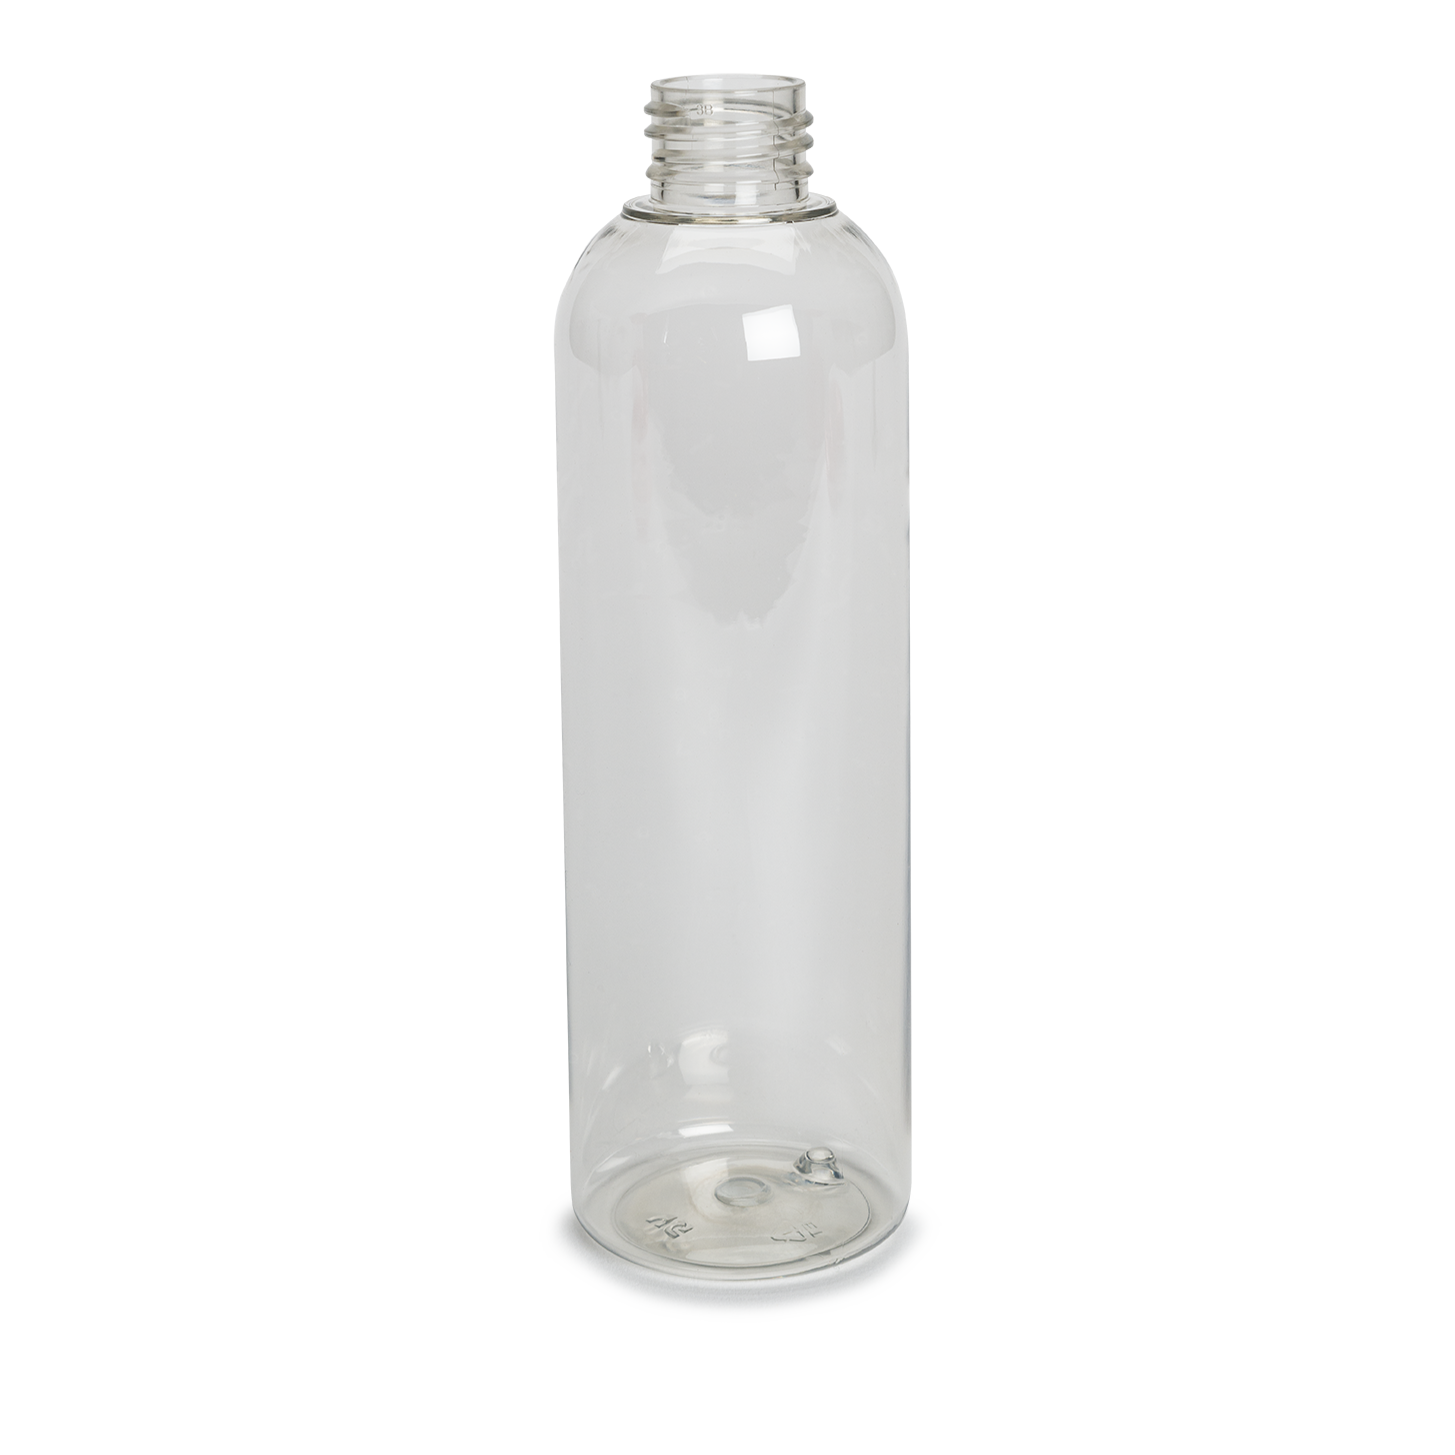 container in plastic flacon douceur250ml- gcmi 24.410- pet cristal recycle 100%